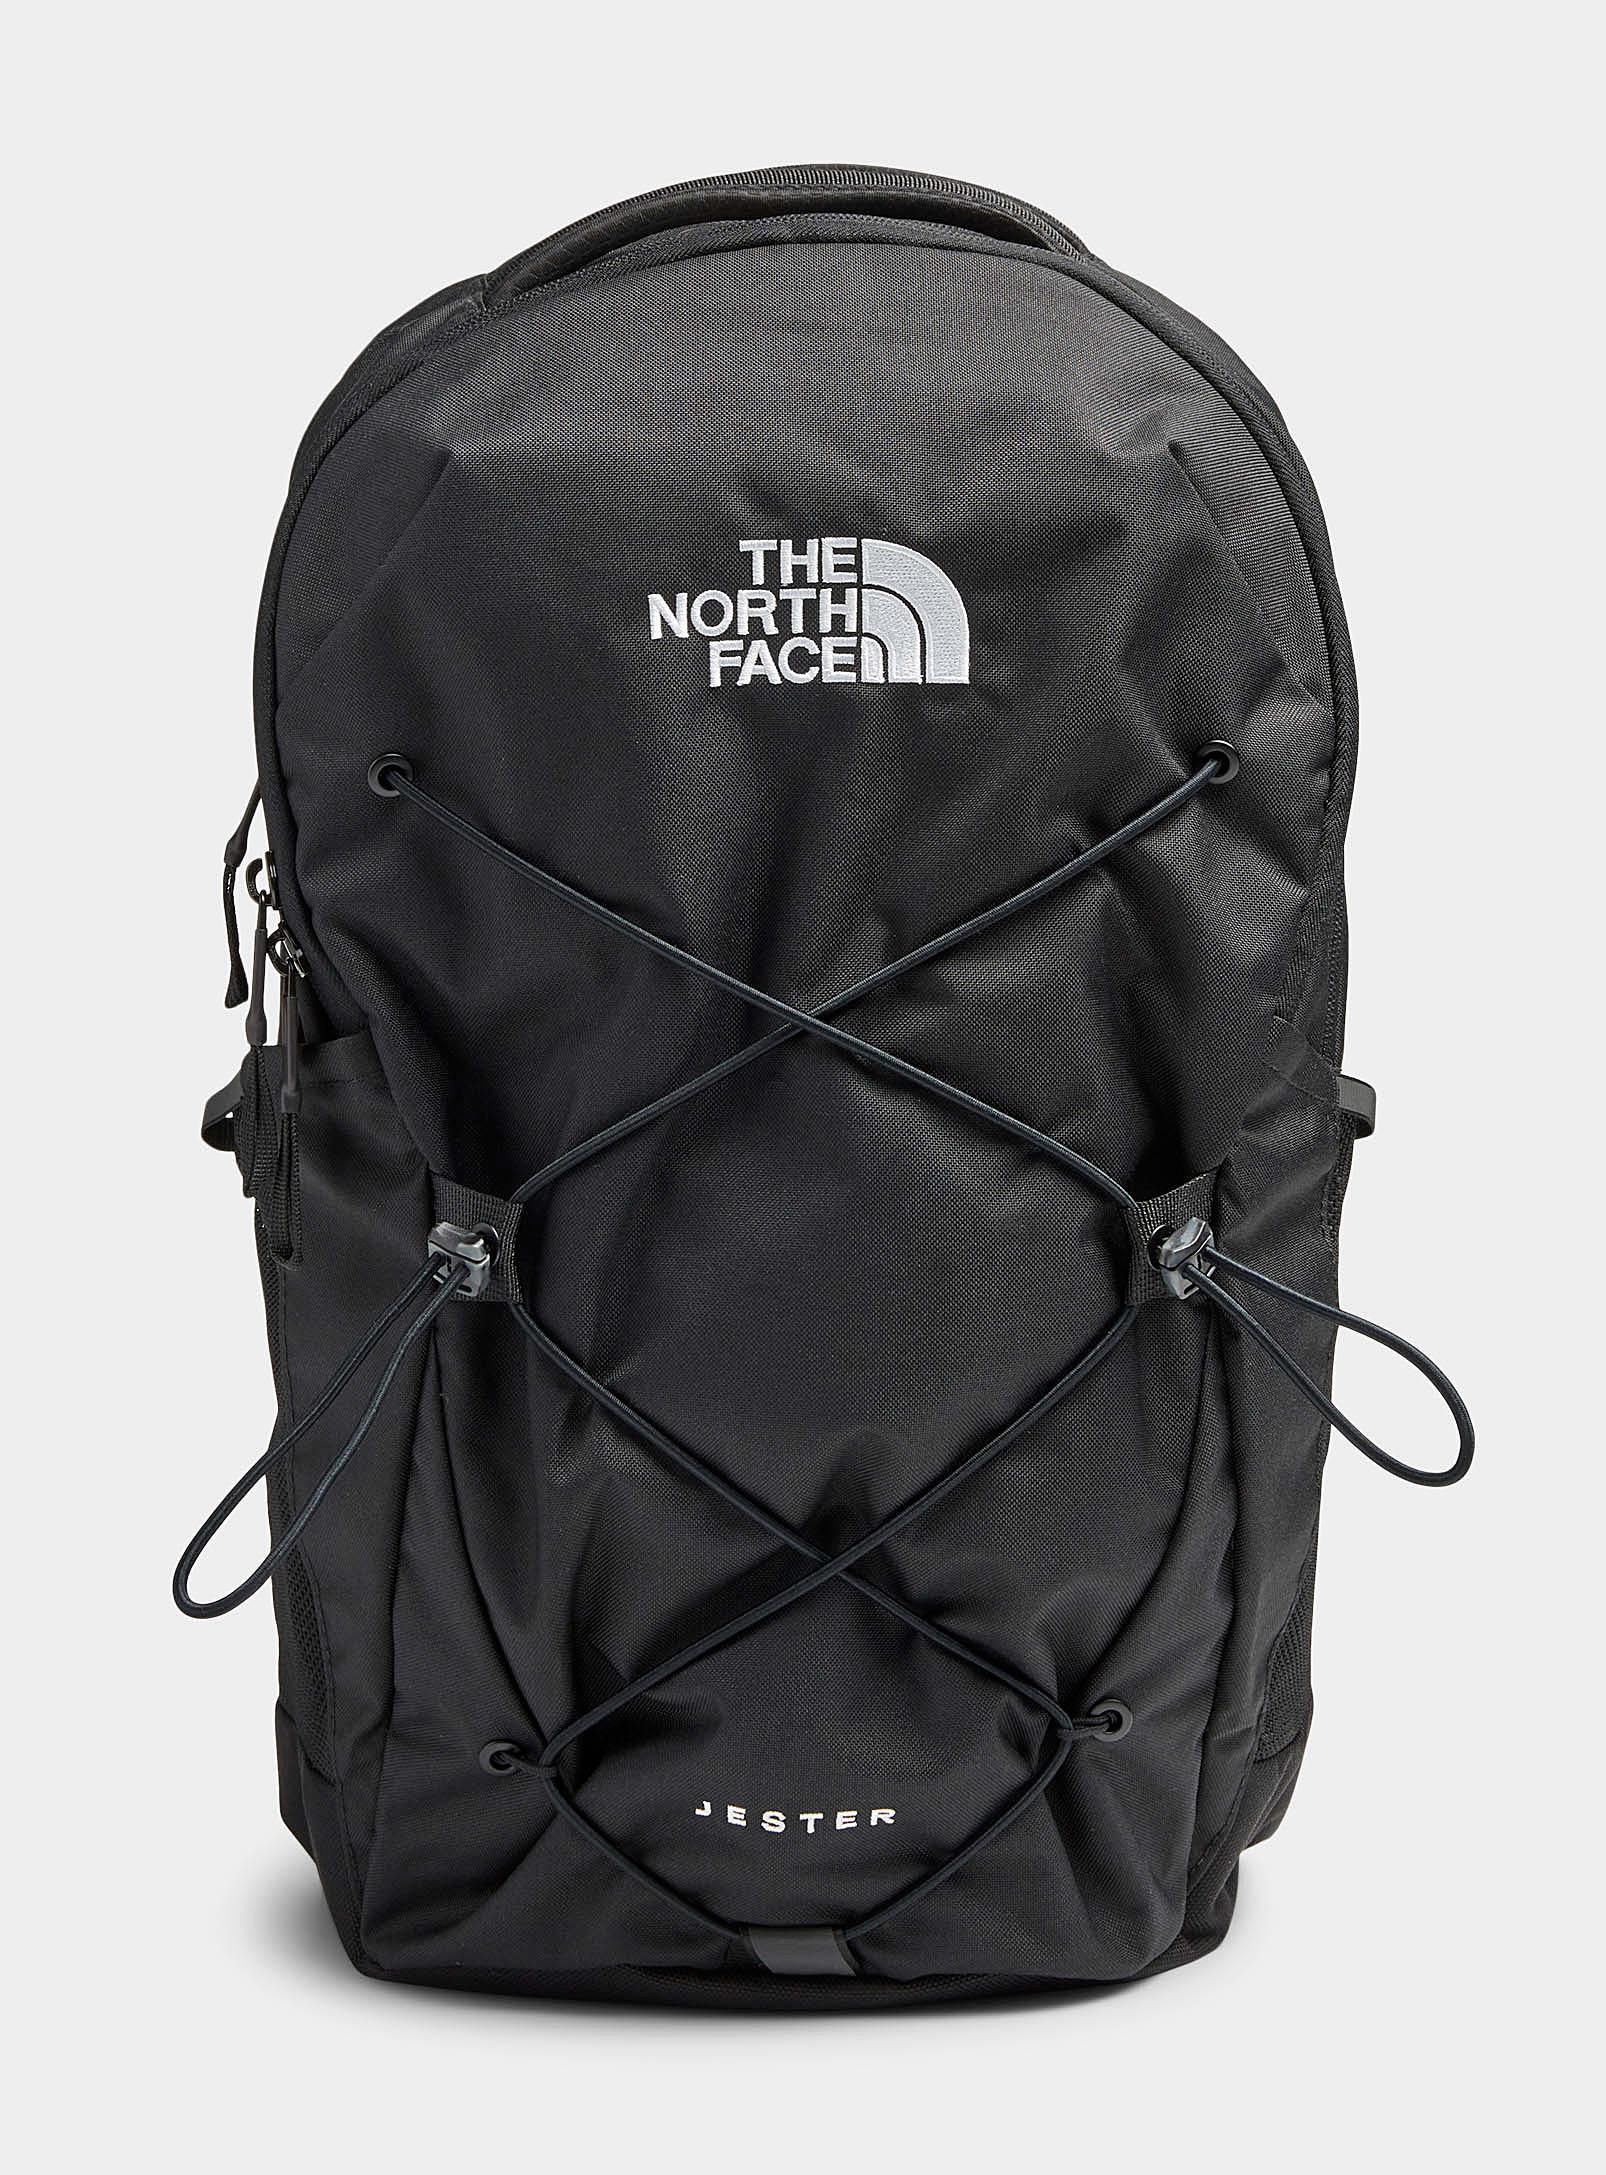 The North Face Jester Backpack In Black